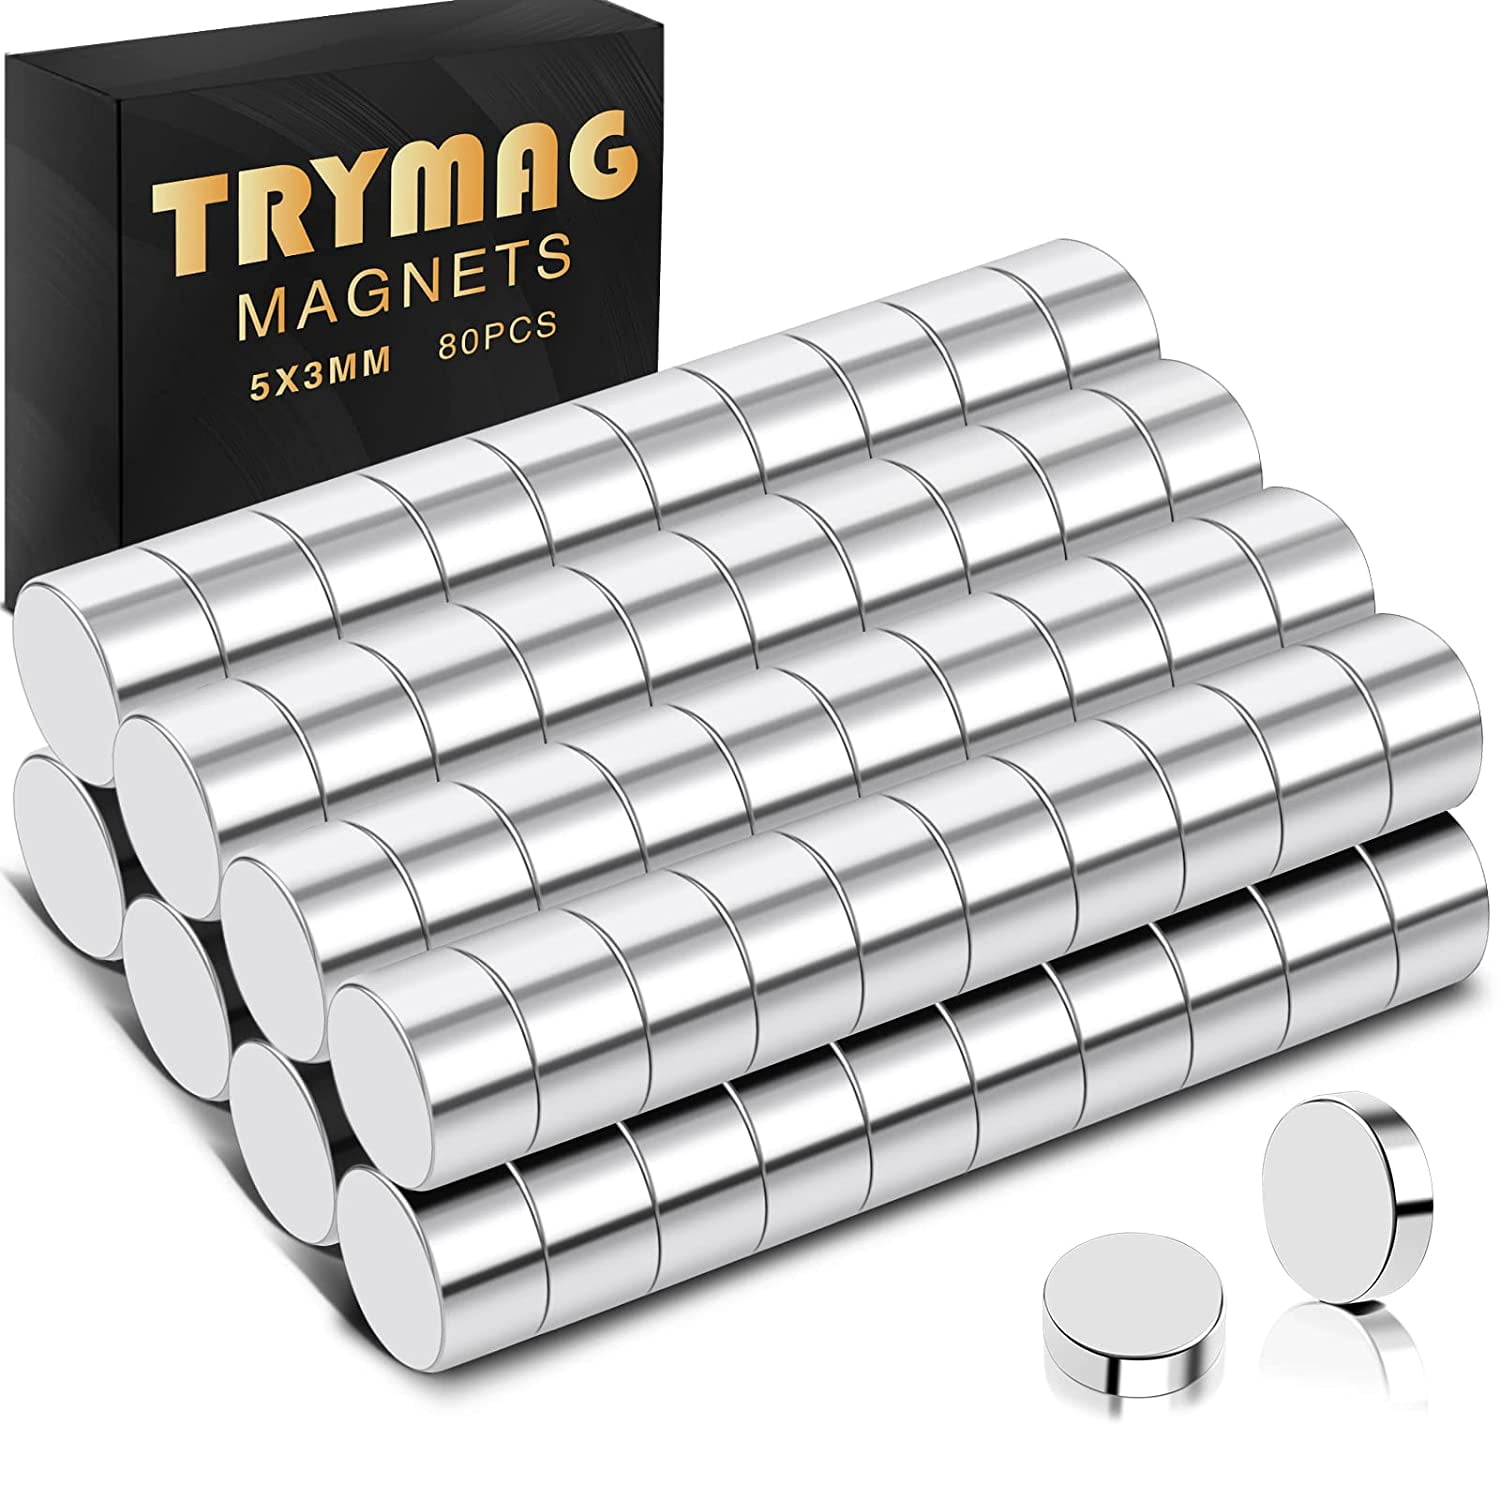 100pcs Small Magnets, 5x2 mm Mini Tiny Round Magnets, Micro Neodymium Magnets for Crafts, Miniatures, Refrigerator, Whiteboard, Nail Cutter